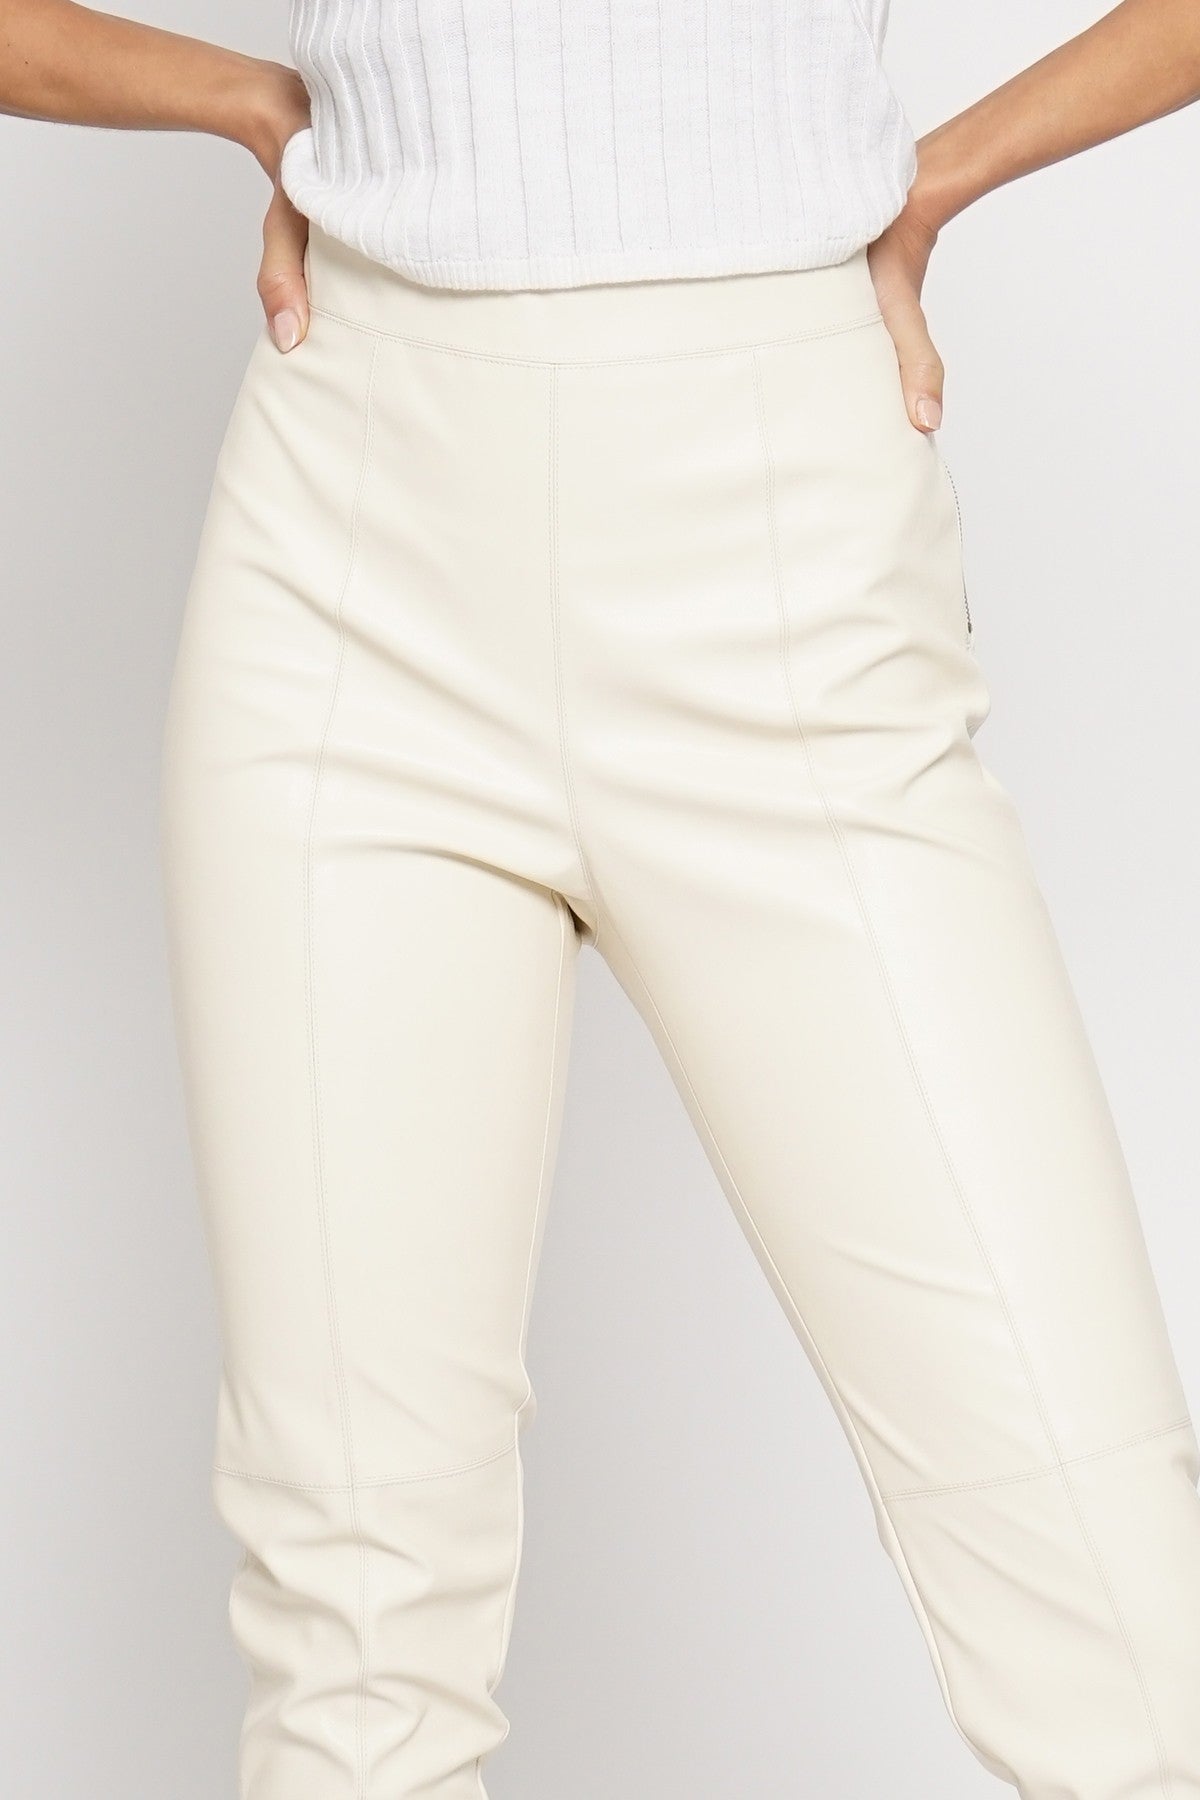 Ivory Leather Pants